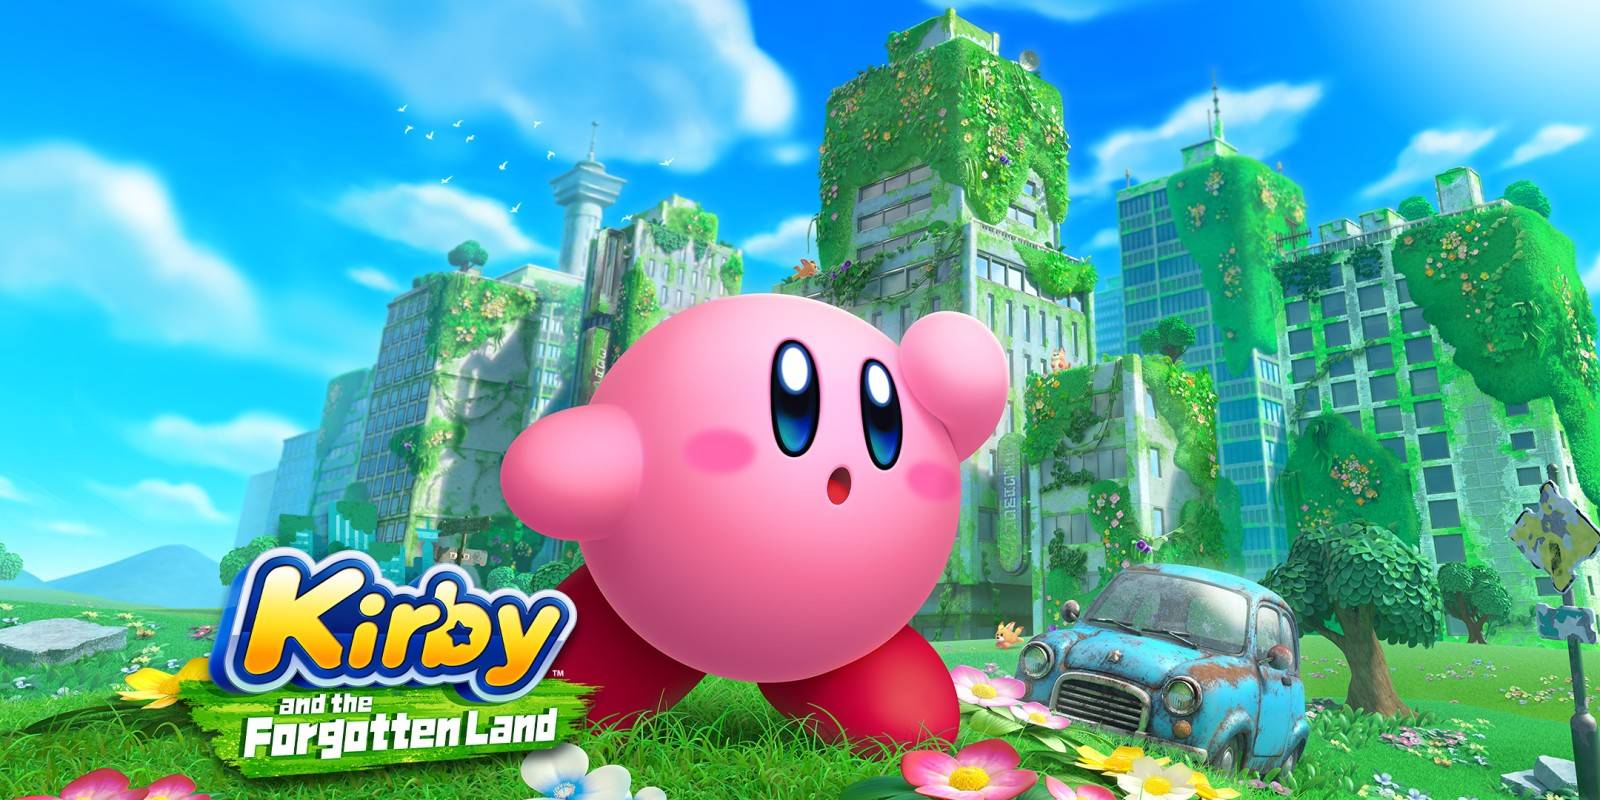 Kirby and the forgotten land 1